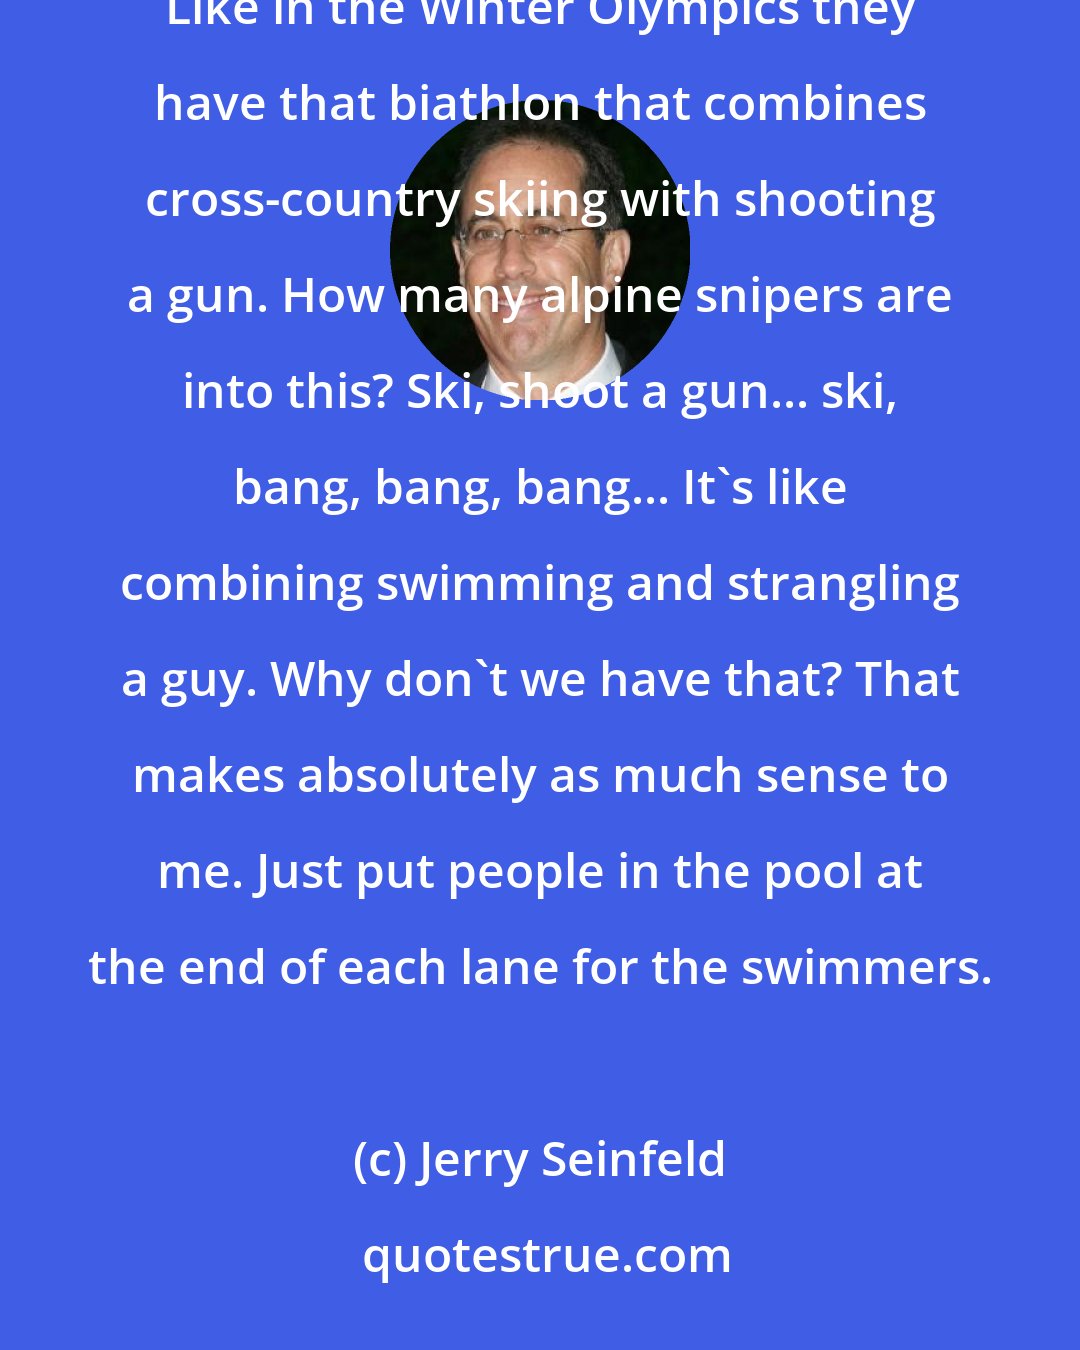 Jerry Seinfeld: Some of the events in the Olympics don't make sense to me. I don't understand the connection to any reality... Like in the Winter Olympics they have that biathlon that combines cross-country skiing with shooting a gun. How many alpine snipers are into this? Ski, shoot a gun... ski, bang, bang, bang... It's like combining swimming and strangling a guy. Why don't we have that? That makes absolutely as much sense to me. Just put people in the pool at the end of each lane for the swimmers.